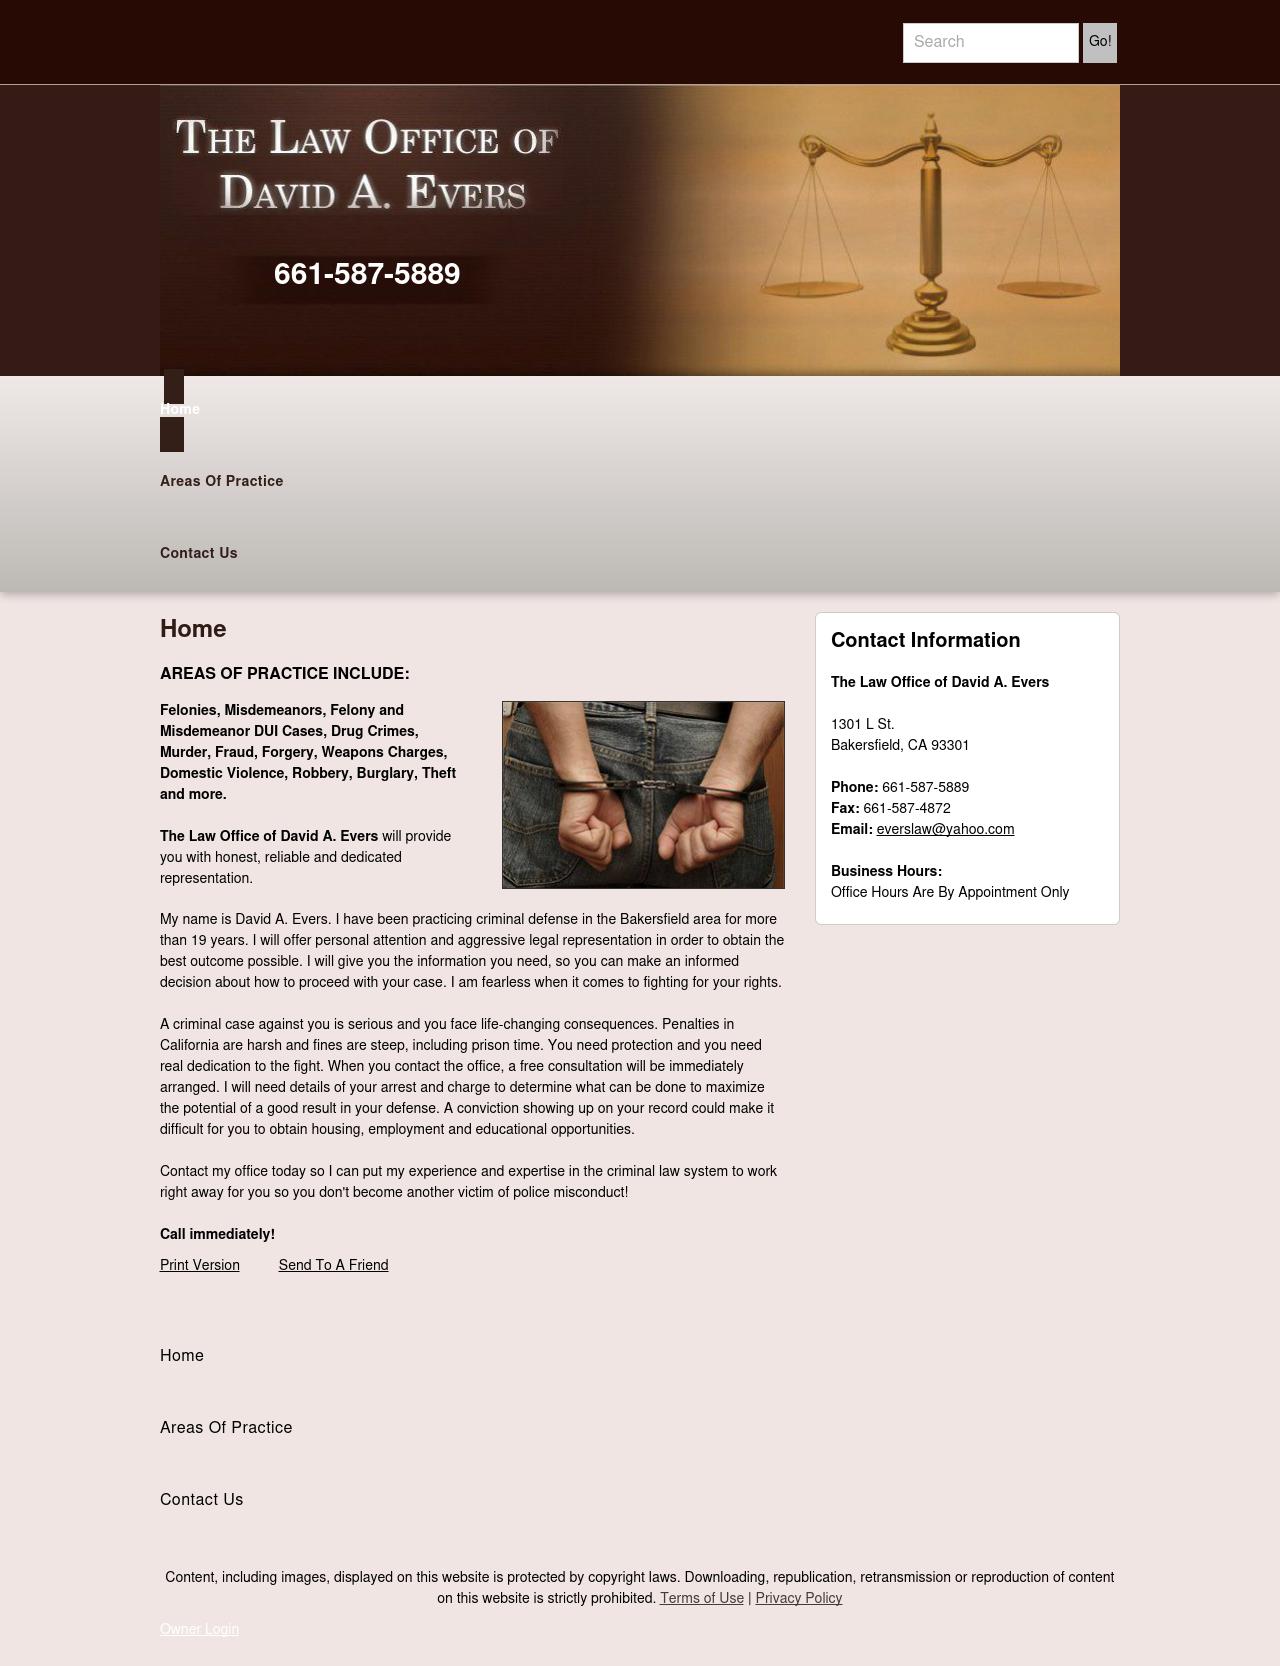 Law Office of David A Evers - Bakersfield CA Lawyers